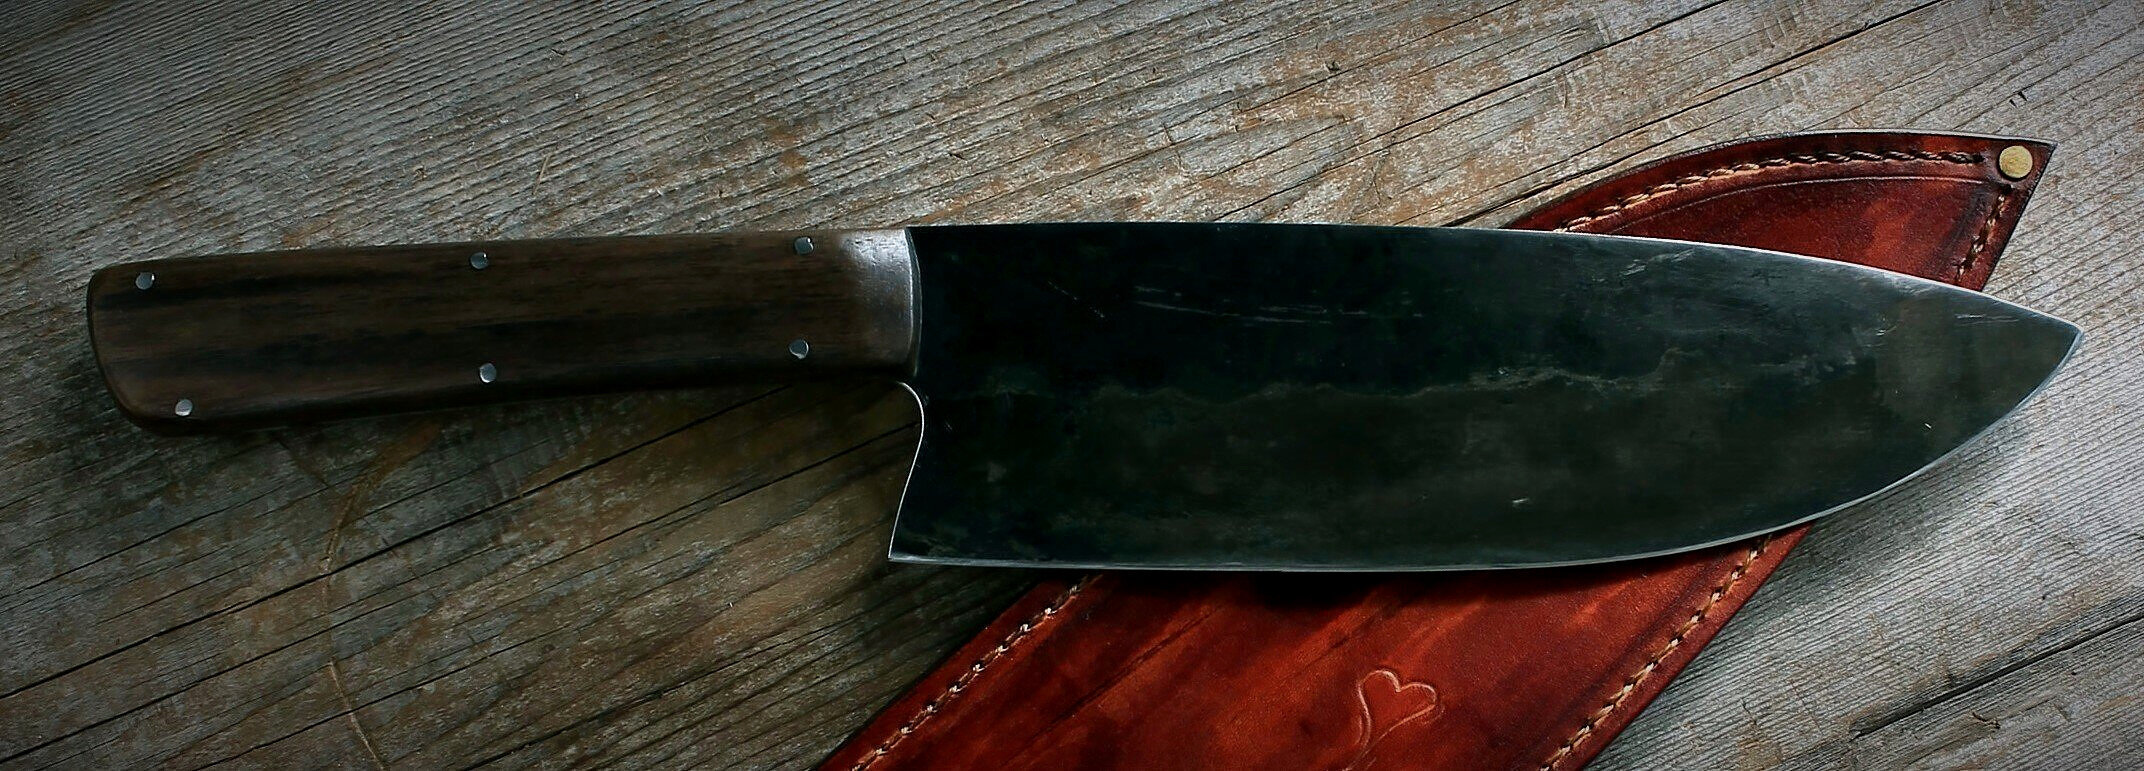 Damascus Kitchen Knife Set, Cheff Knife, Pairing Knife, Hand-forged Carbon  Steel Ulu Knife and Cleaver